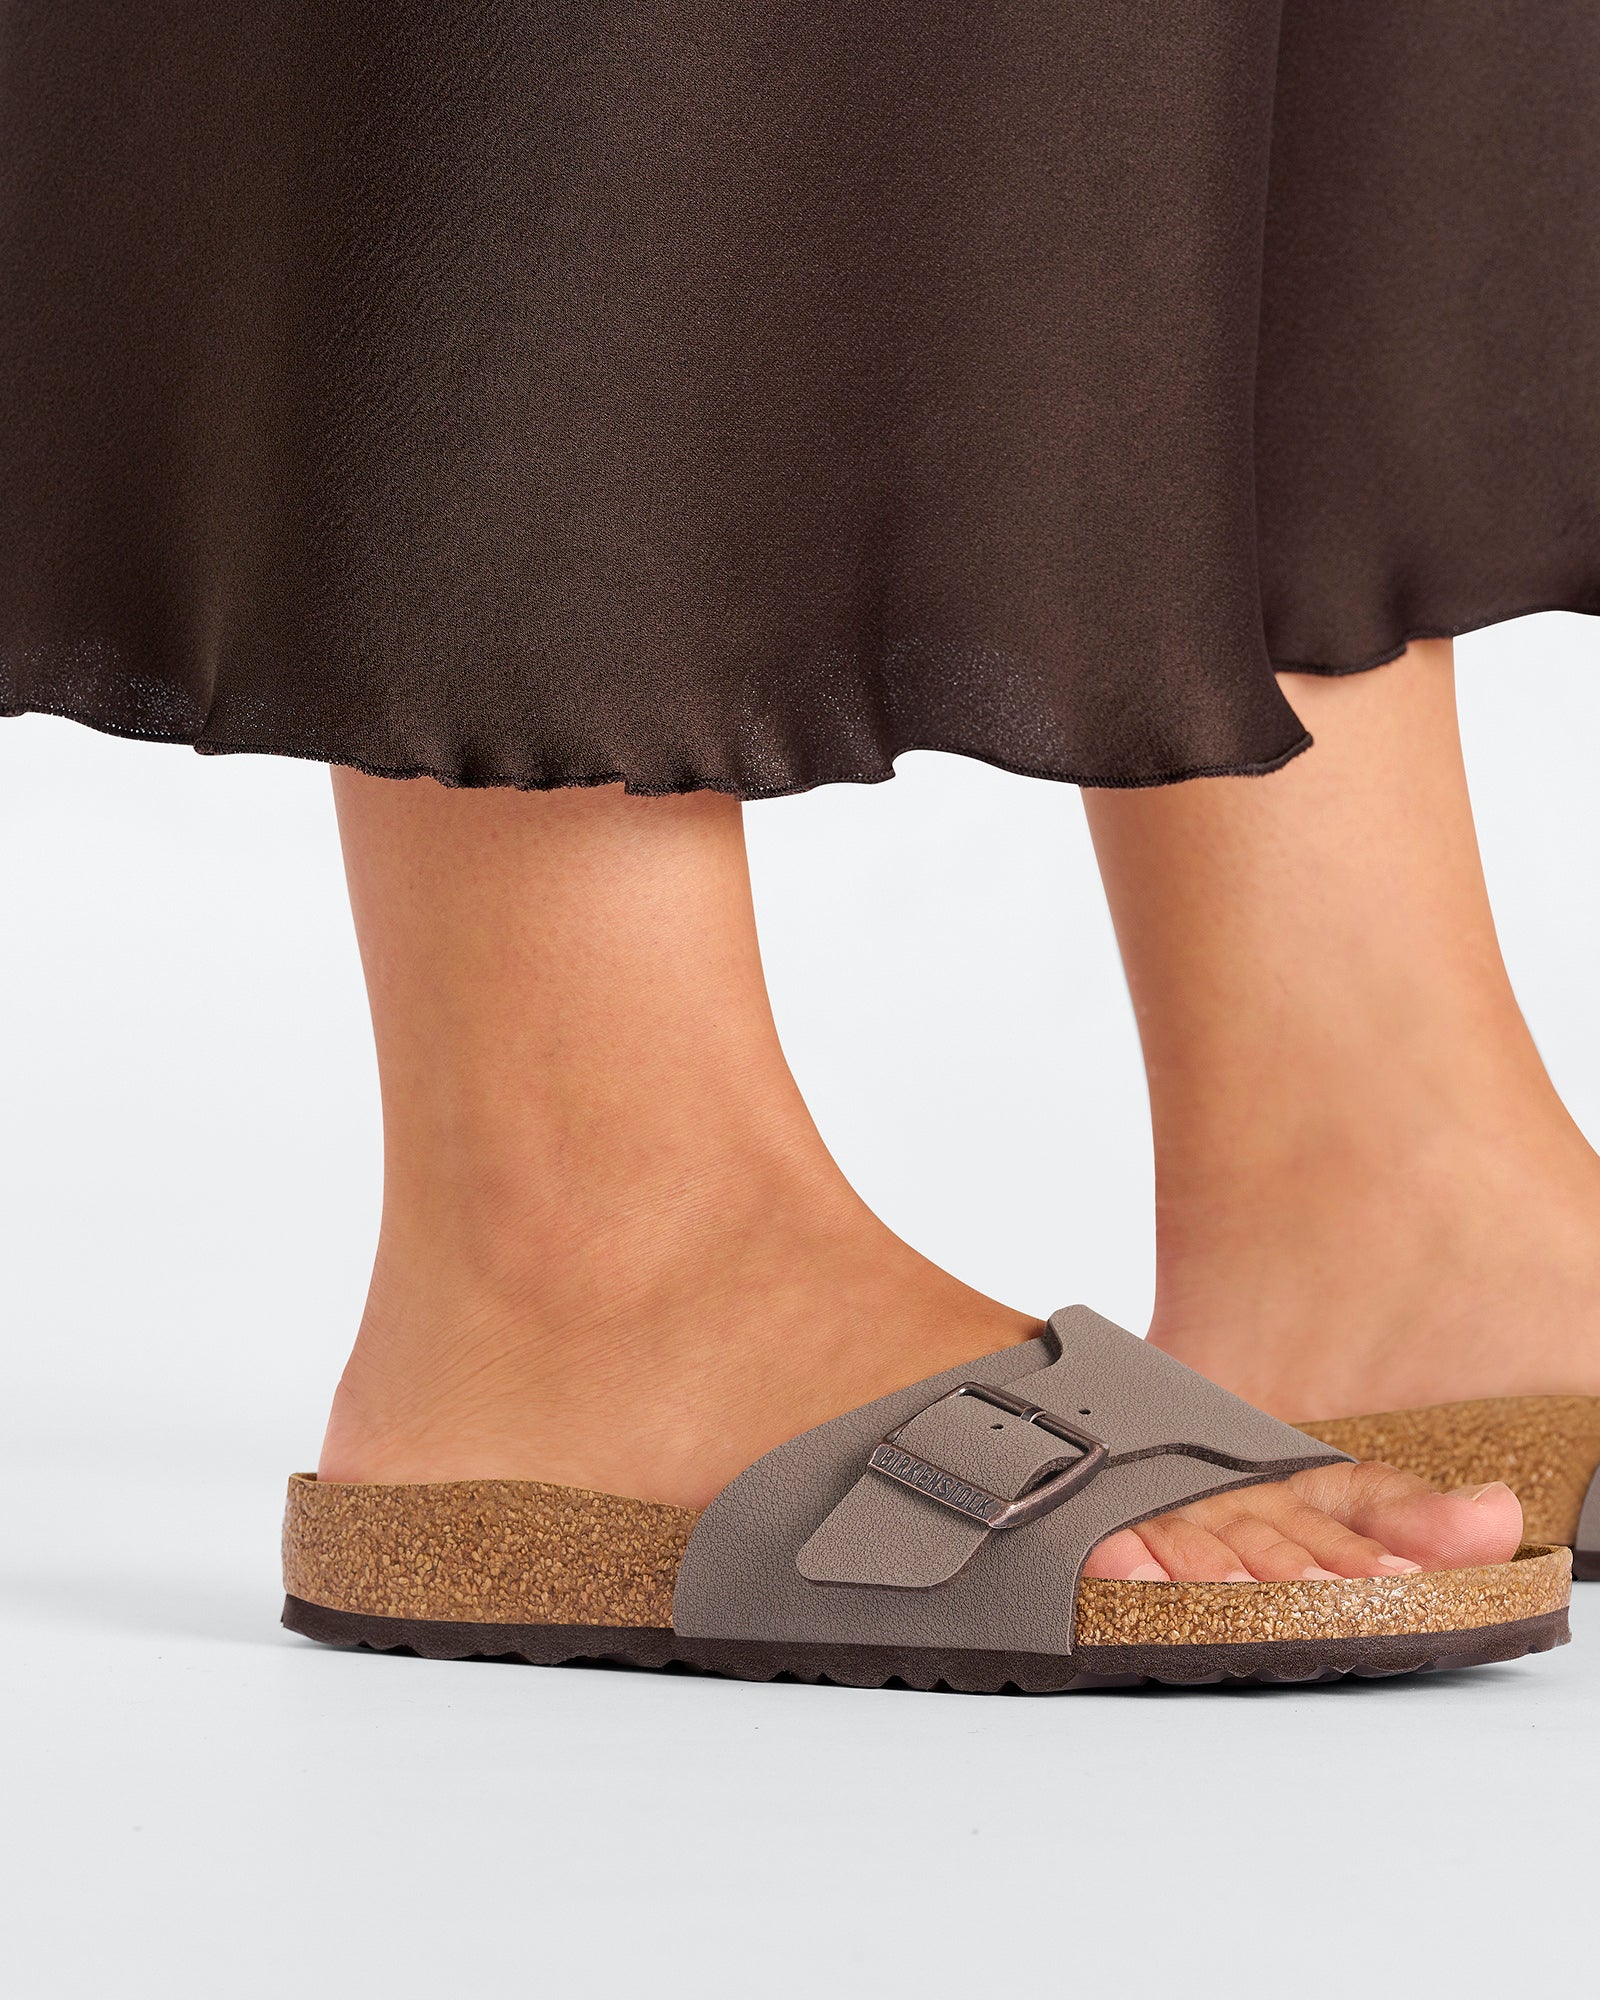 Catalina BS BirkoFlor Sandals - Mocca